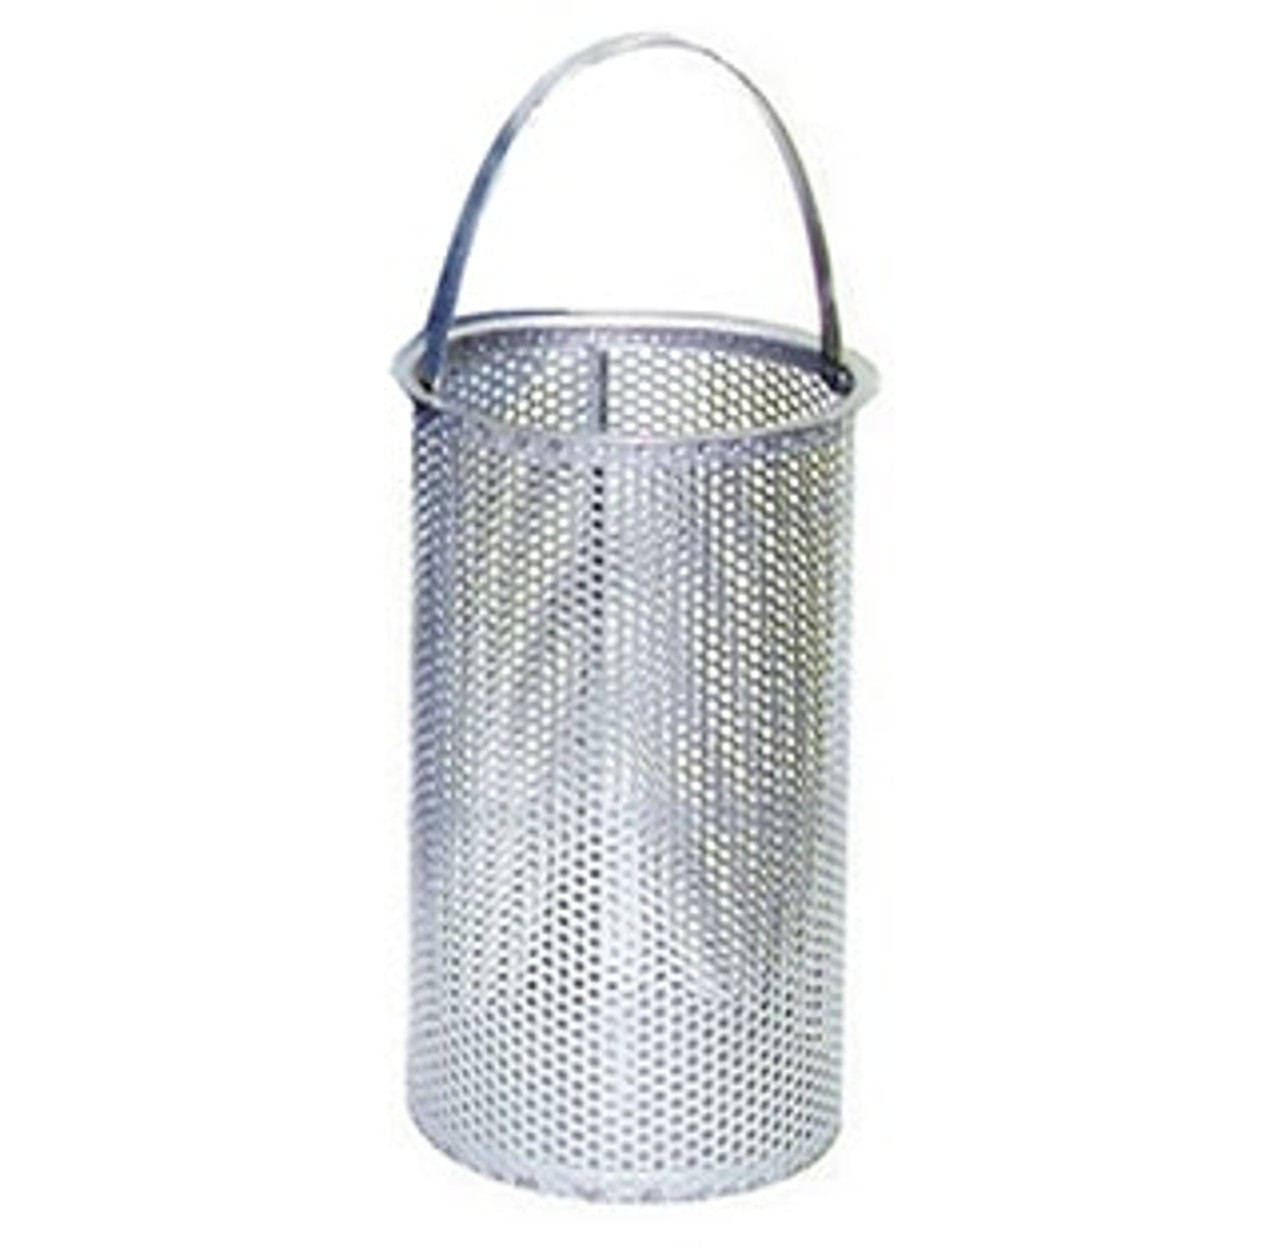 3/16" Perforated Replacement Basket for 4" Eaton Model 53BTX Strainer